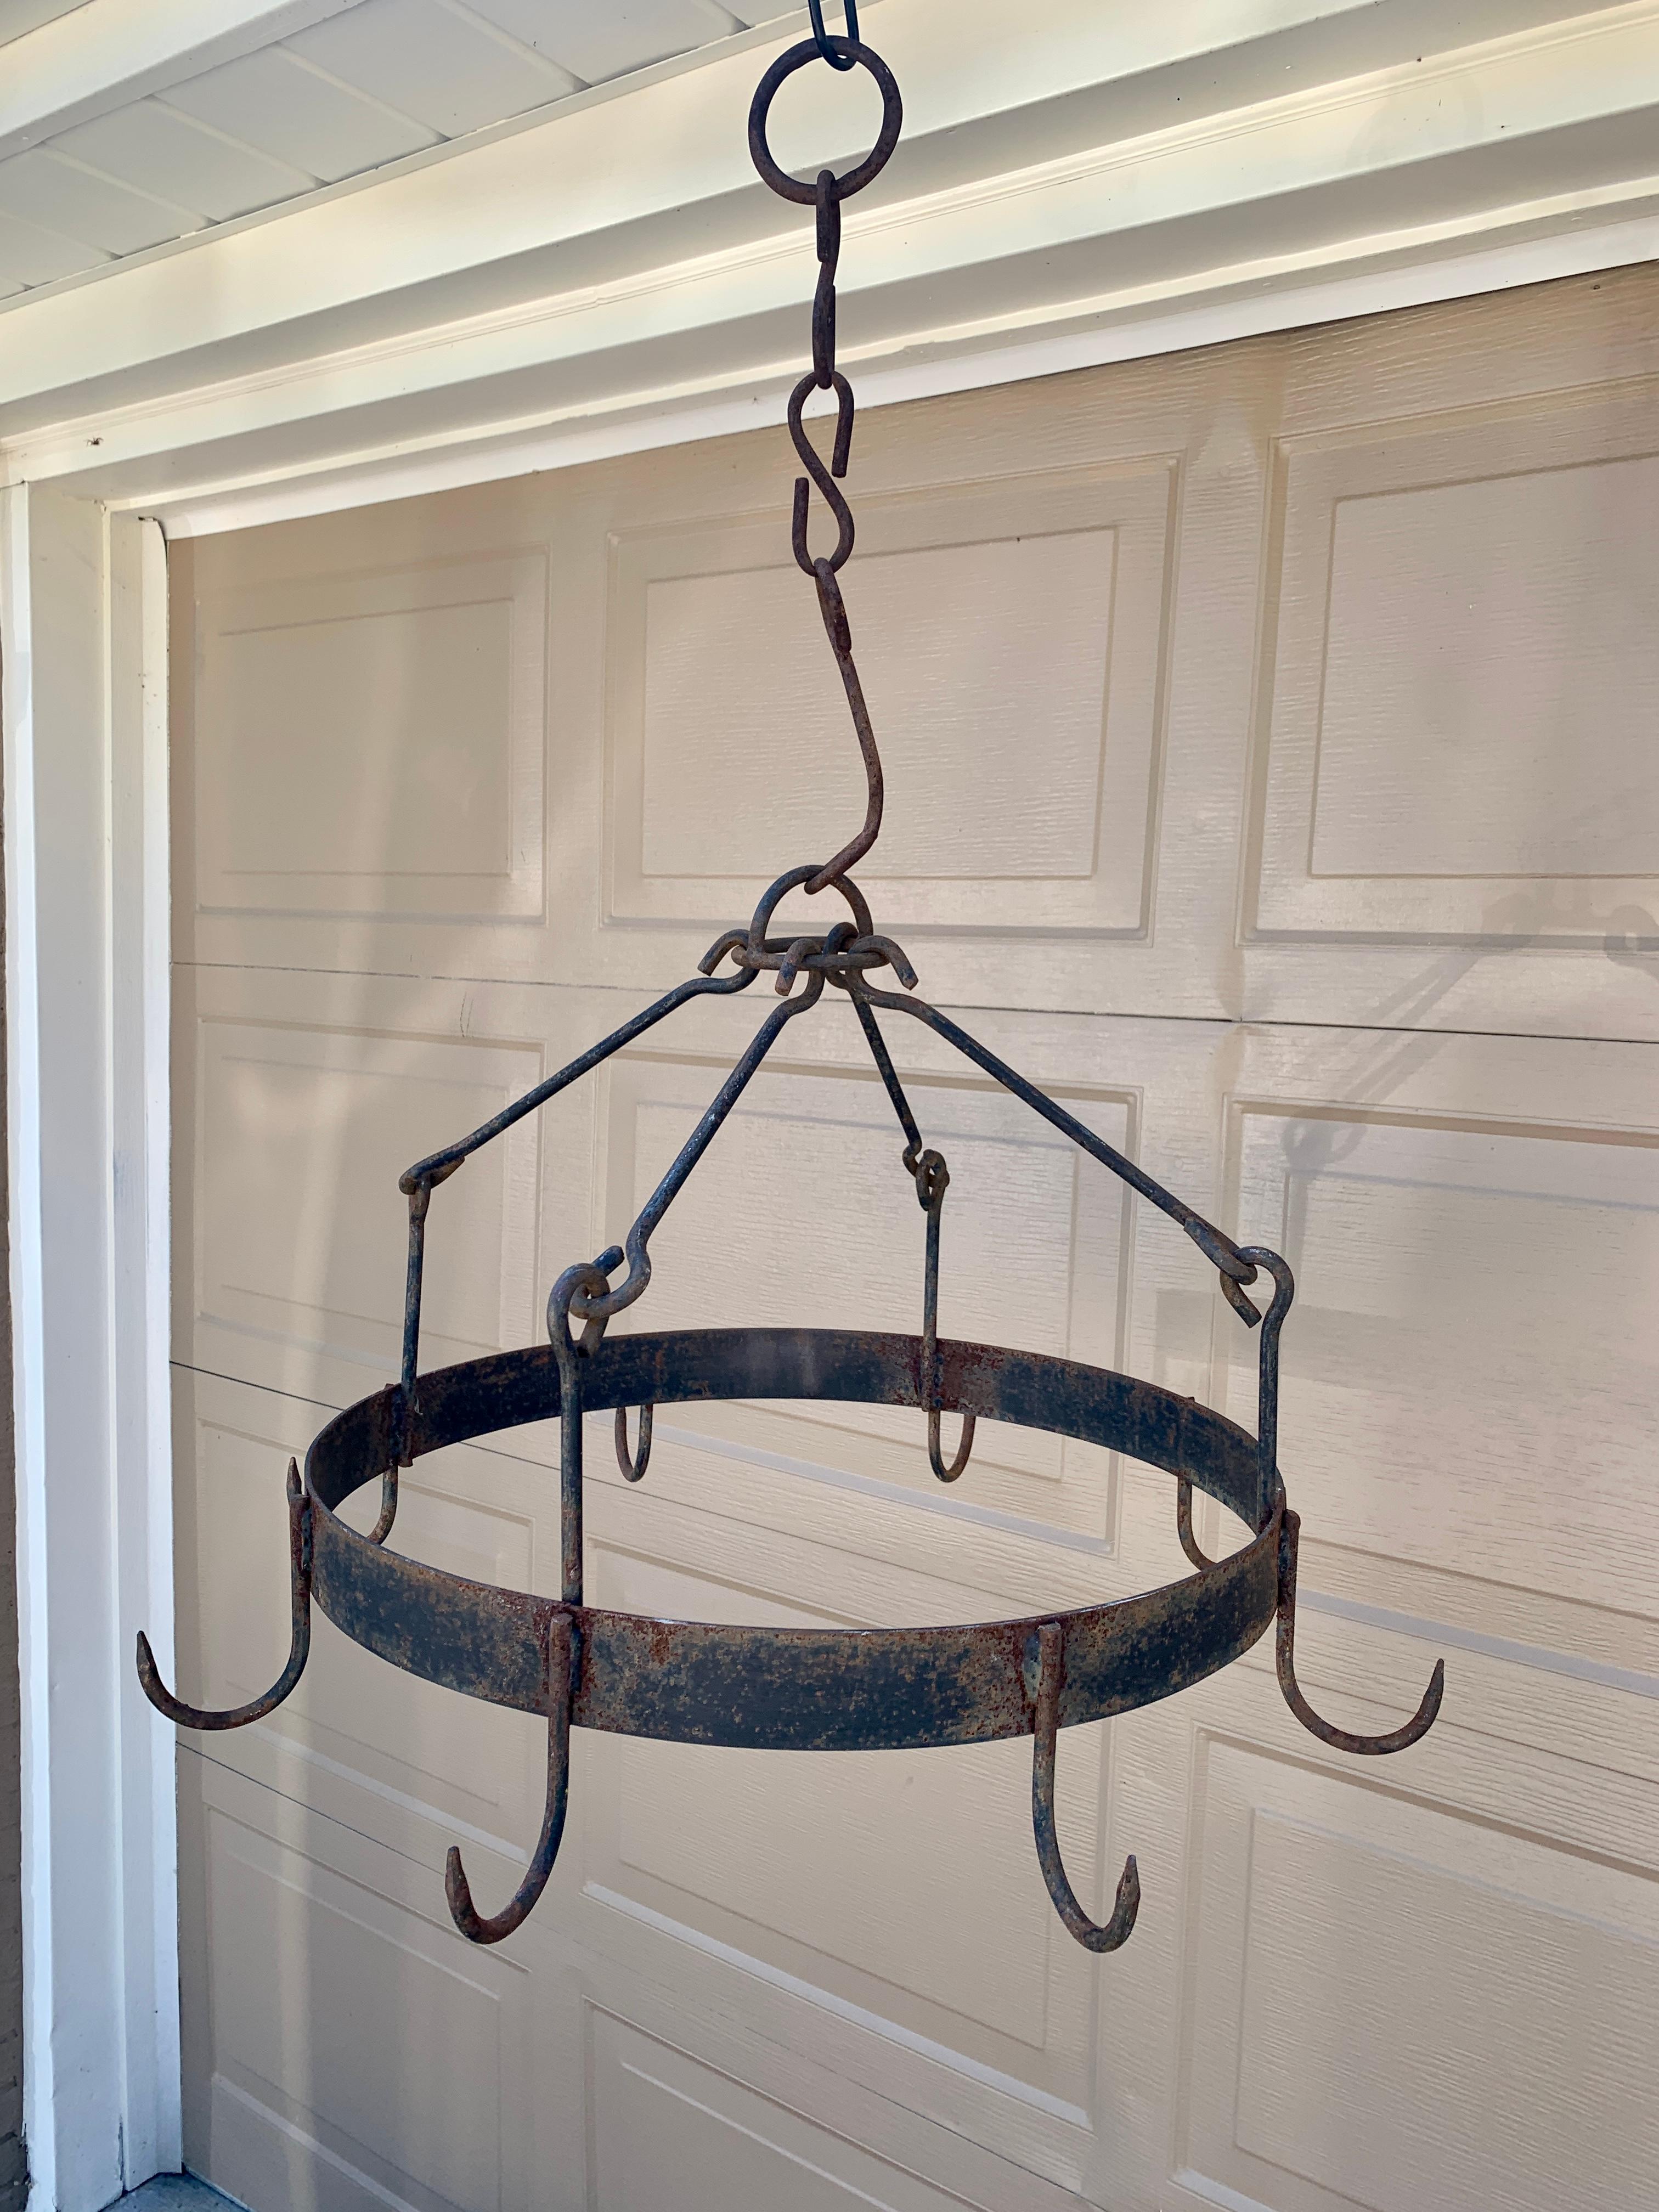 A very nice early 19th century blacksmith handwrought iron game rack with a center ring with eight hooks supported by four arms. Game racks are used to hang small game meat such as fowl, rabbits, etc to dry after a hunt. They were also used to dry